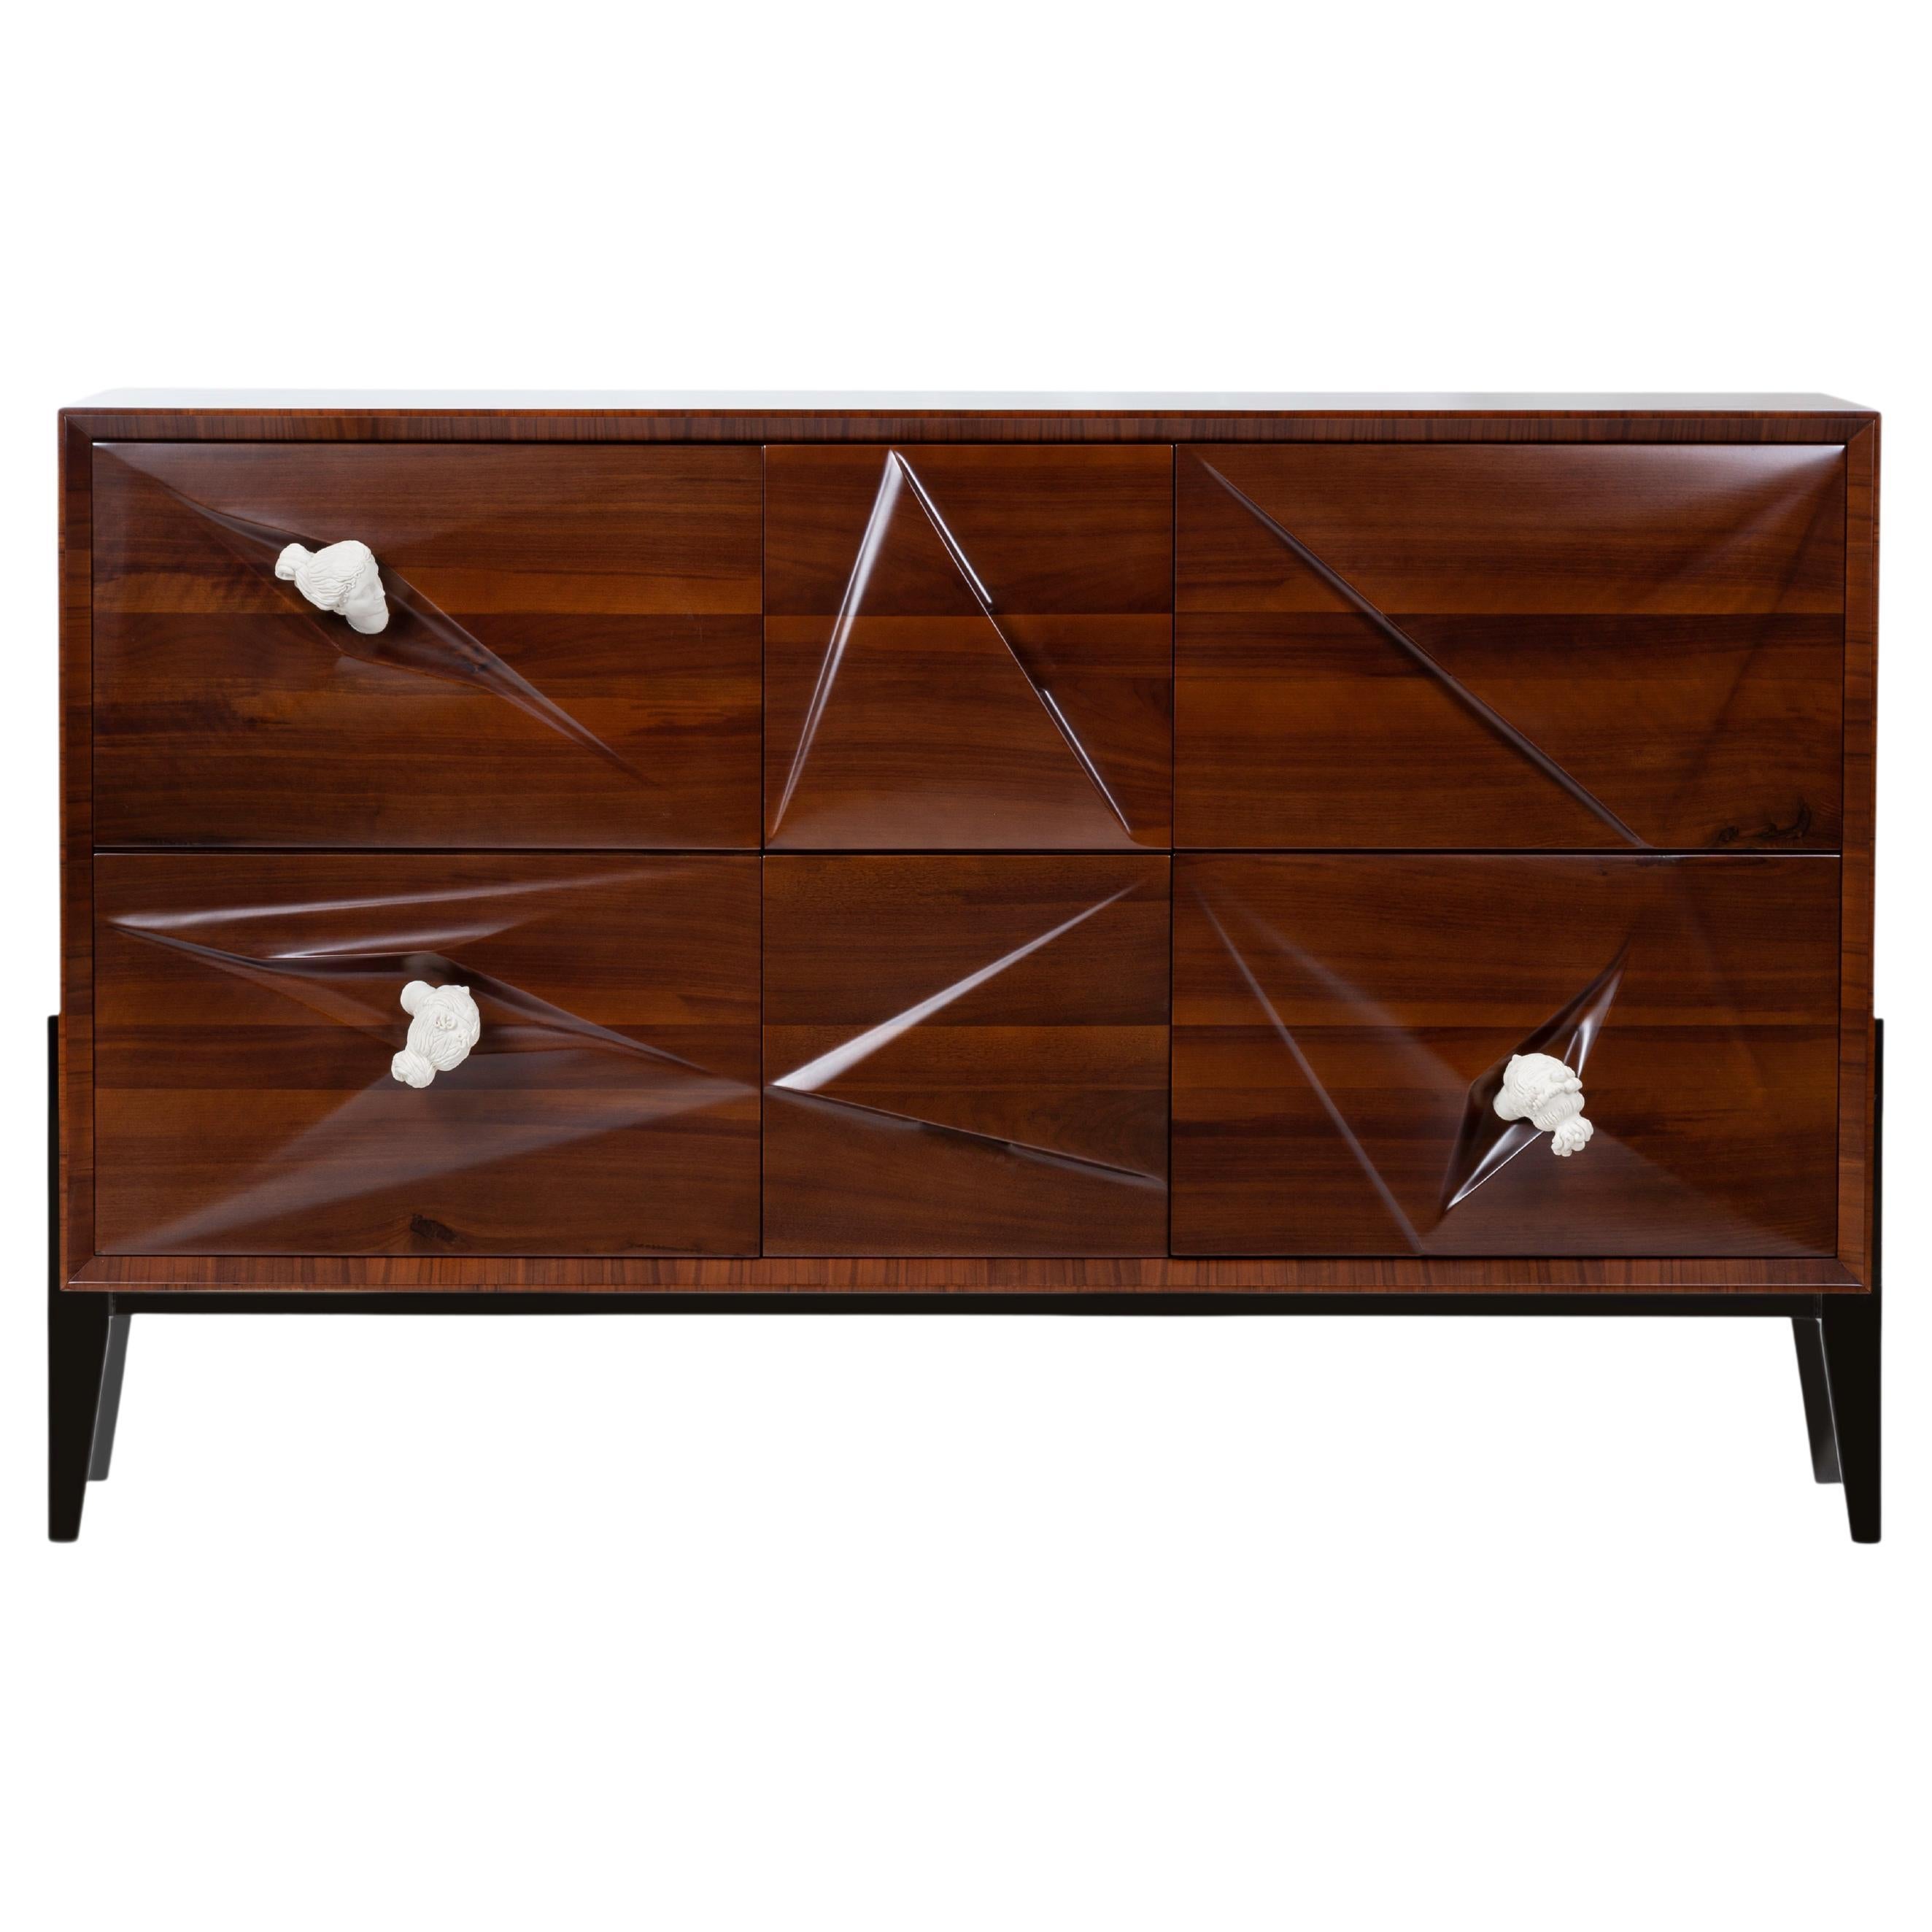 21st Century Ca Nova Sideboard, Walnut and Porcelain, Made in Italy by Hebanon For Sale